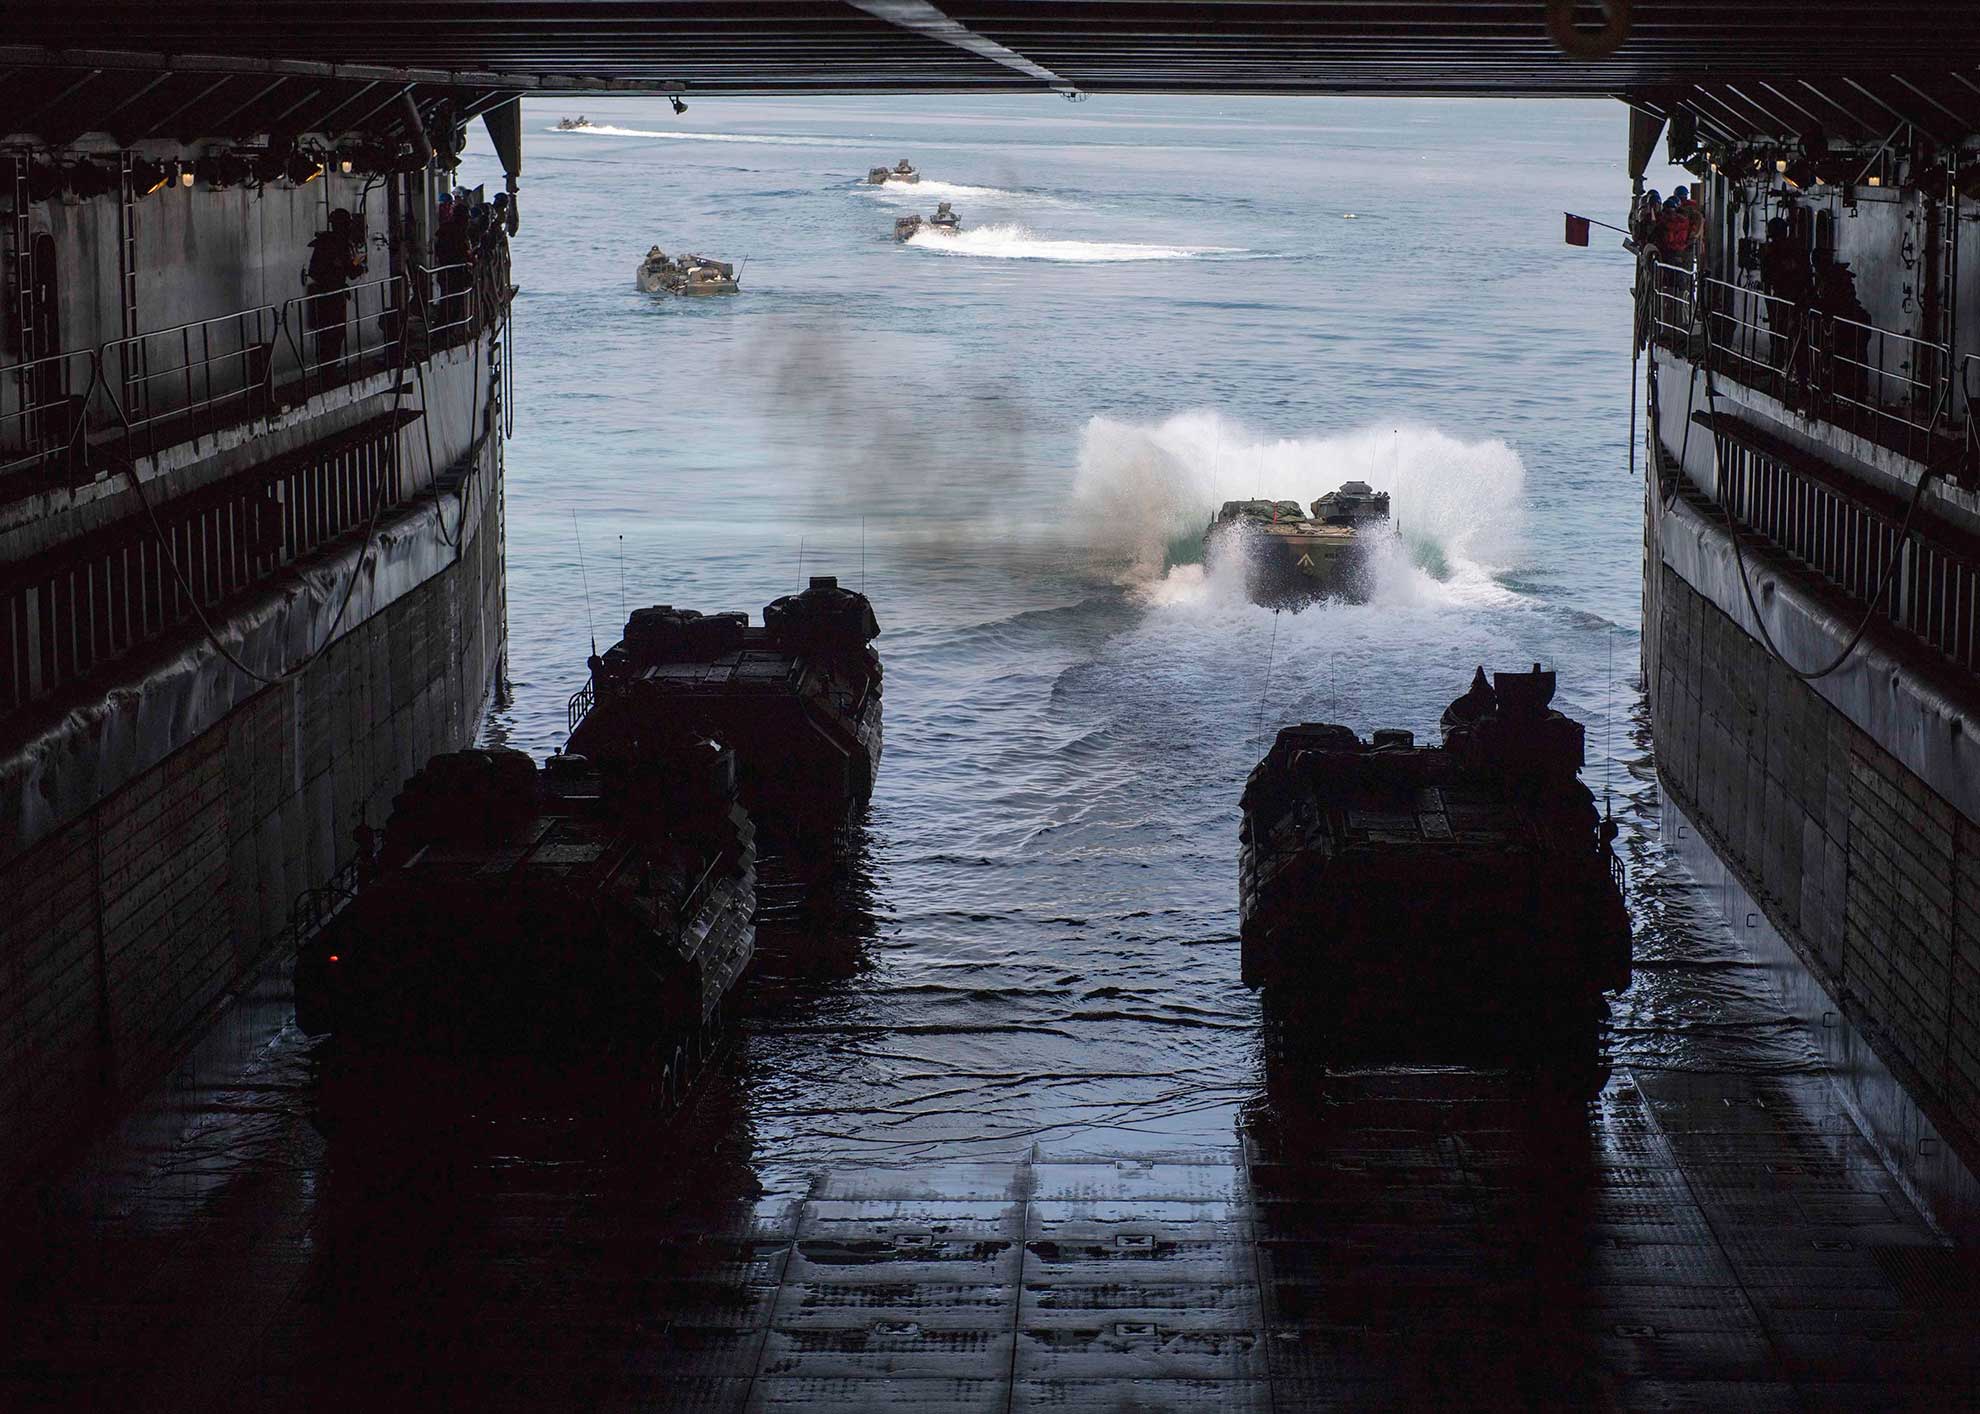 Subic Bay, Republic of the Philippines (Oct. 2, 2018) AAV-P7/A1 assault amphibious vehicles depart the well deck of the amphibious dock landing ship USS Ashland (LSD 48) as part of a training exercise for KAMANDAG 2. KAMANDAG 2 is a military training exercise led by Philippines between the Armed Forces of the Philippines and U.S. military, along with participants from the Japan Self-Defense Force featuring military-to-military exchanges through various training events, capabilities development training, and humanitarian and civic assistance projects. KAMANDAG is an acronym for the Filipino phrase "Kaagapay Ng Mga Mandirigma Ng Dagat," which translates to "Cooperation of Warriors of the Sea," highlighting the partnership between the Philippine and United States Militaries -- U.S. Navy photo by MCS2 Joshua Mortensen. -